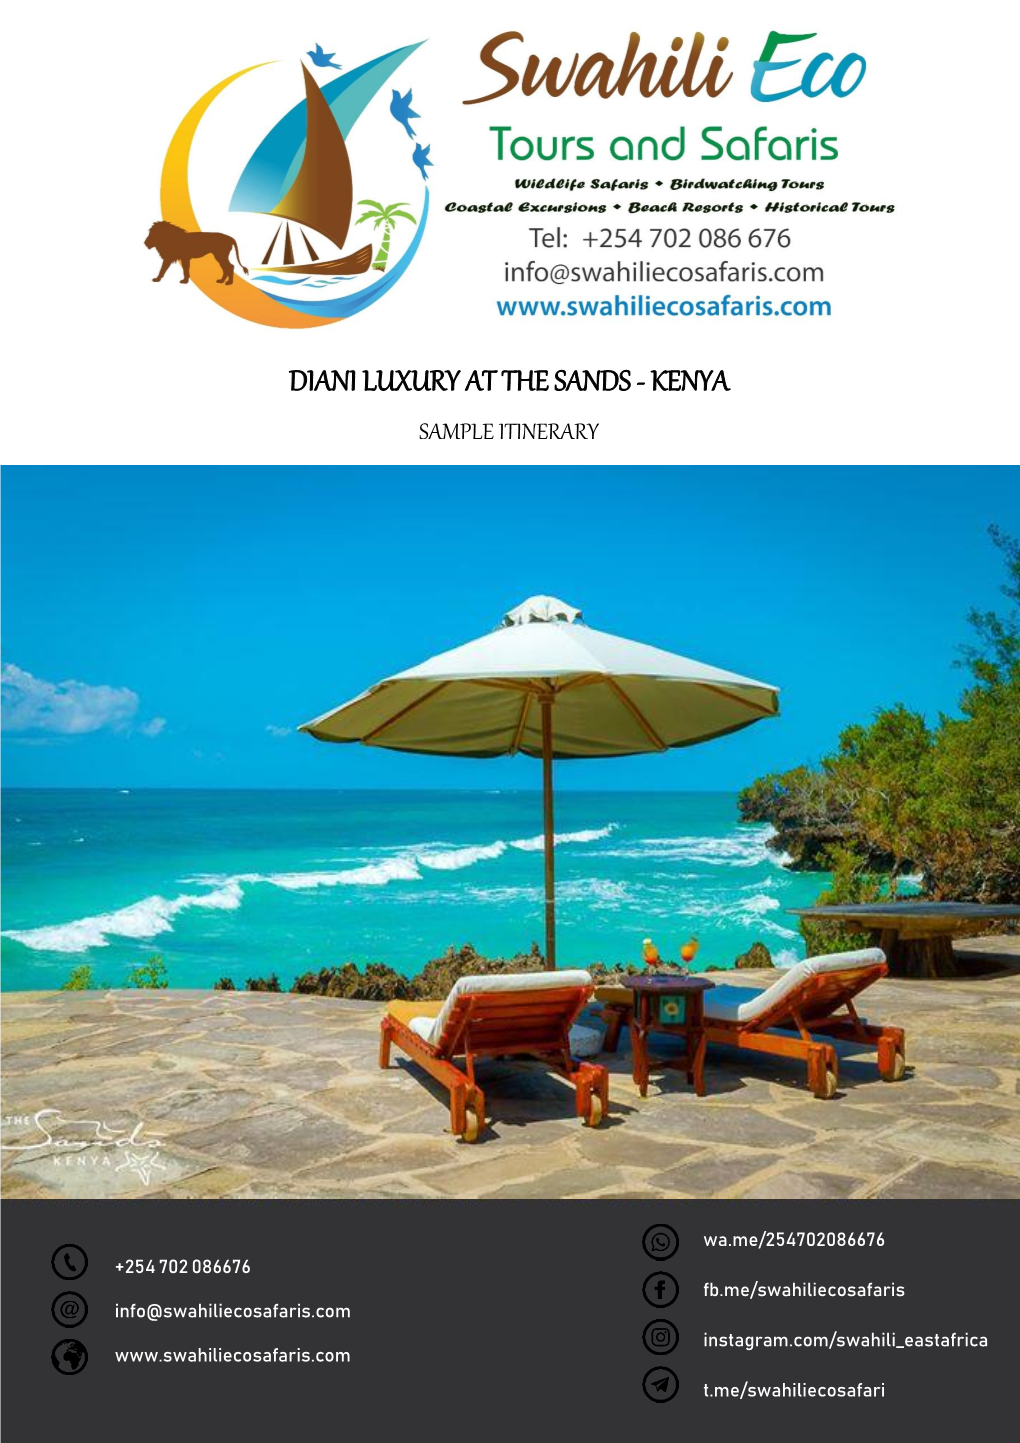 Diani Luxury at the Sands - Kenya